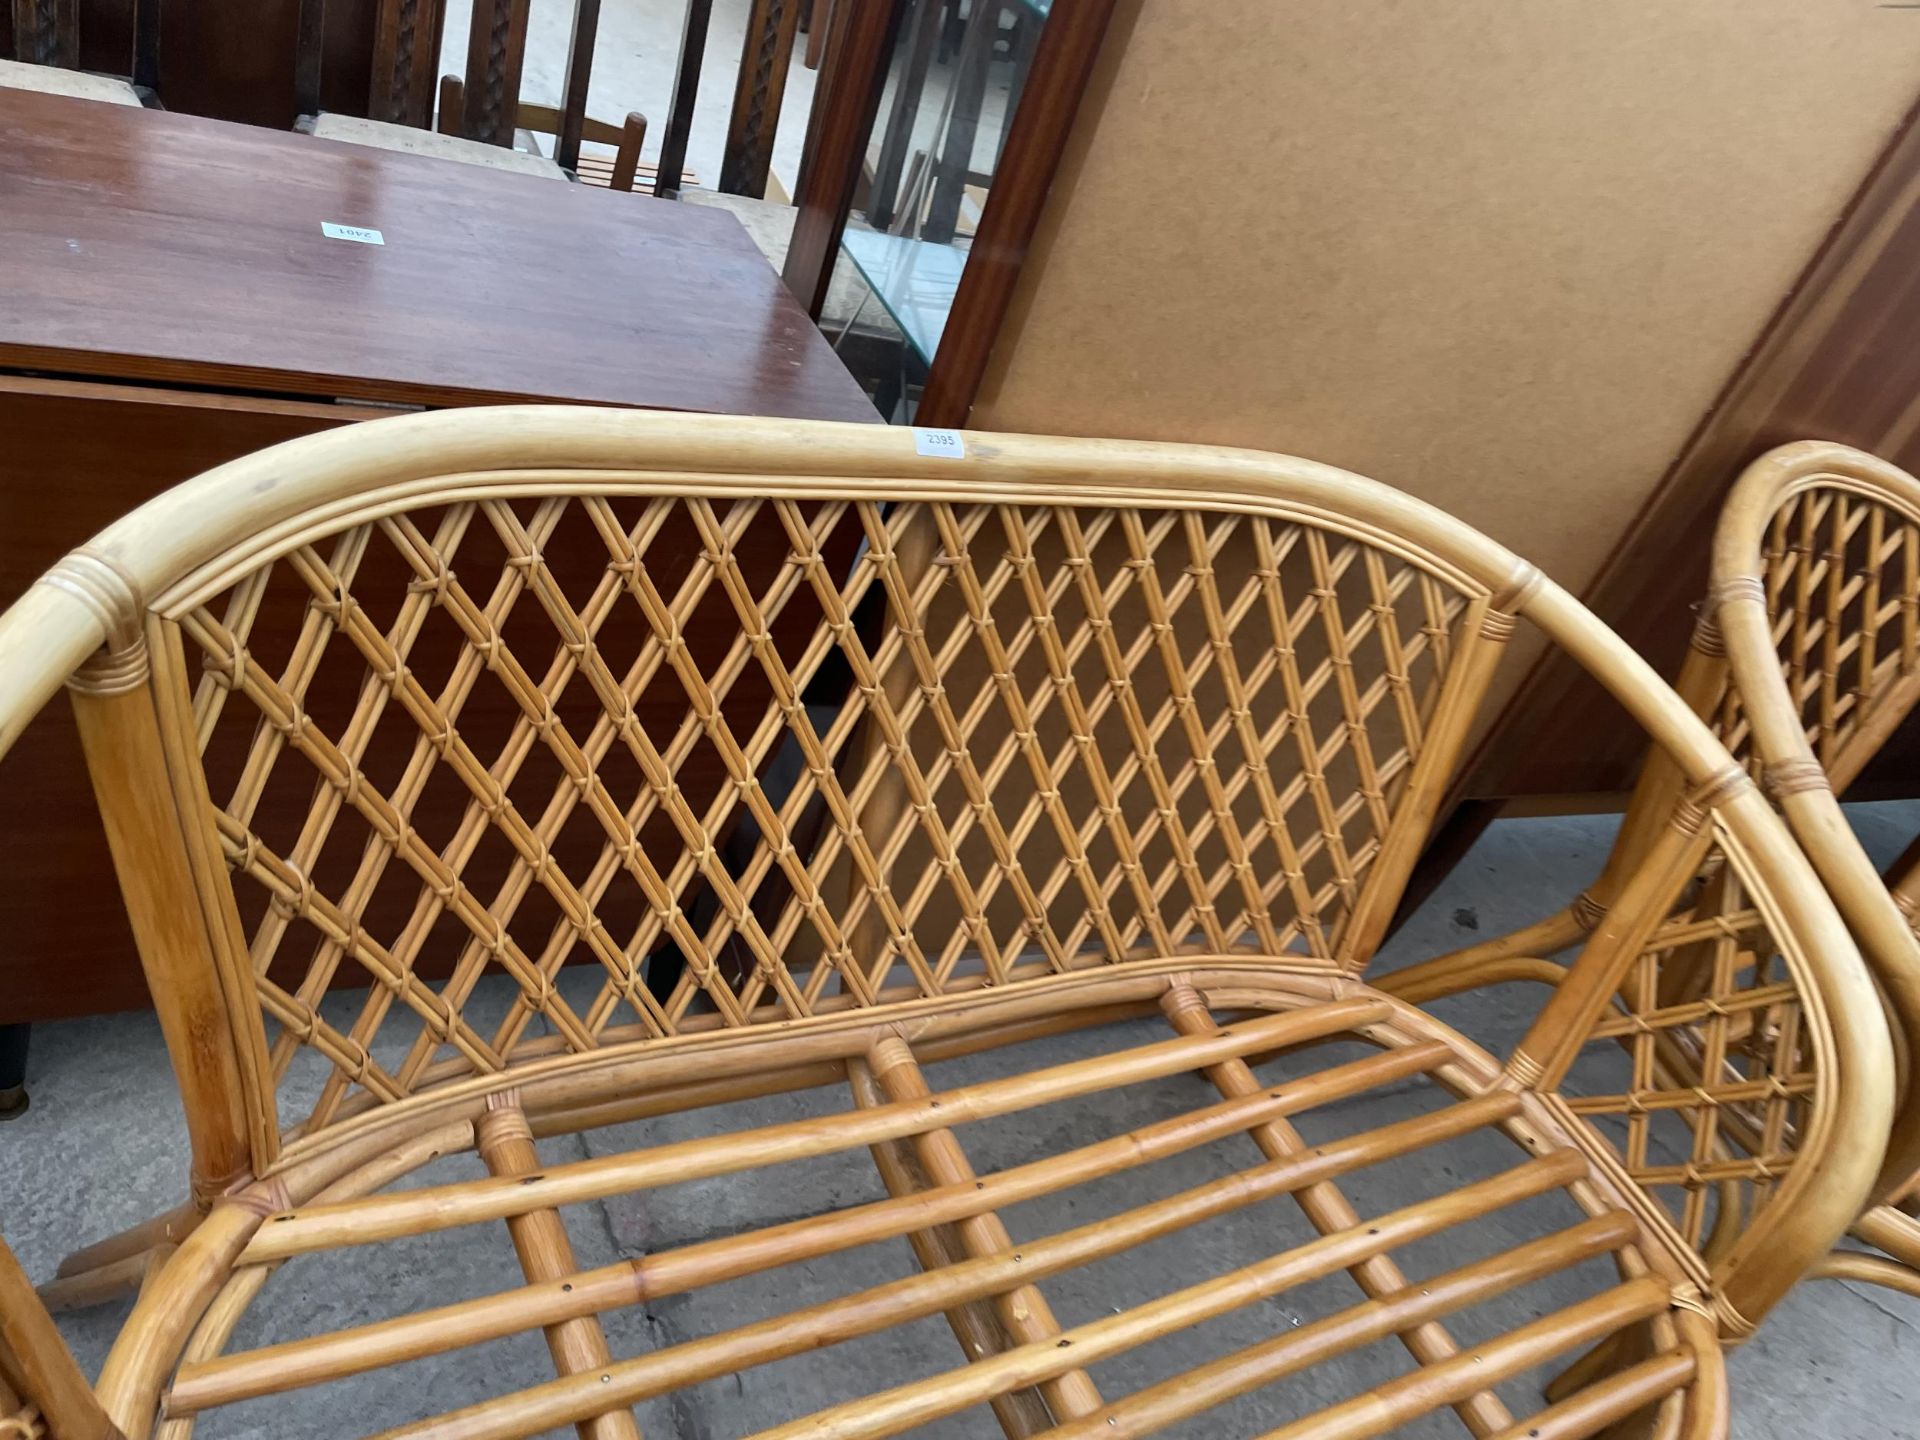 A WICKER AND BAMBOO SETTLE AND CHAIR, LACKING CUSHIONS - Image 2 of 3